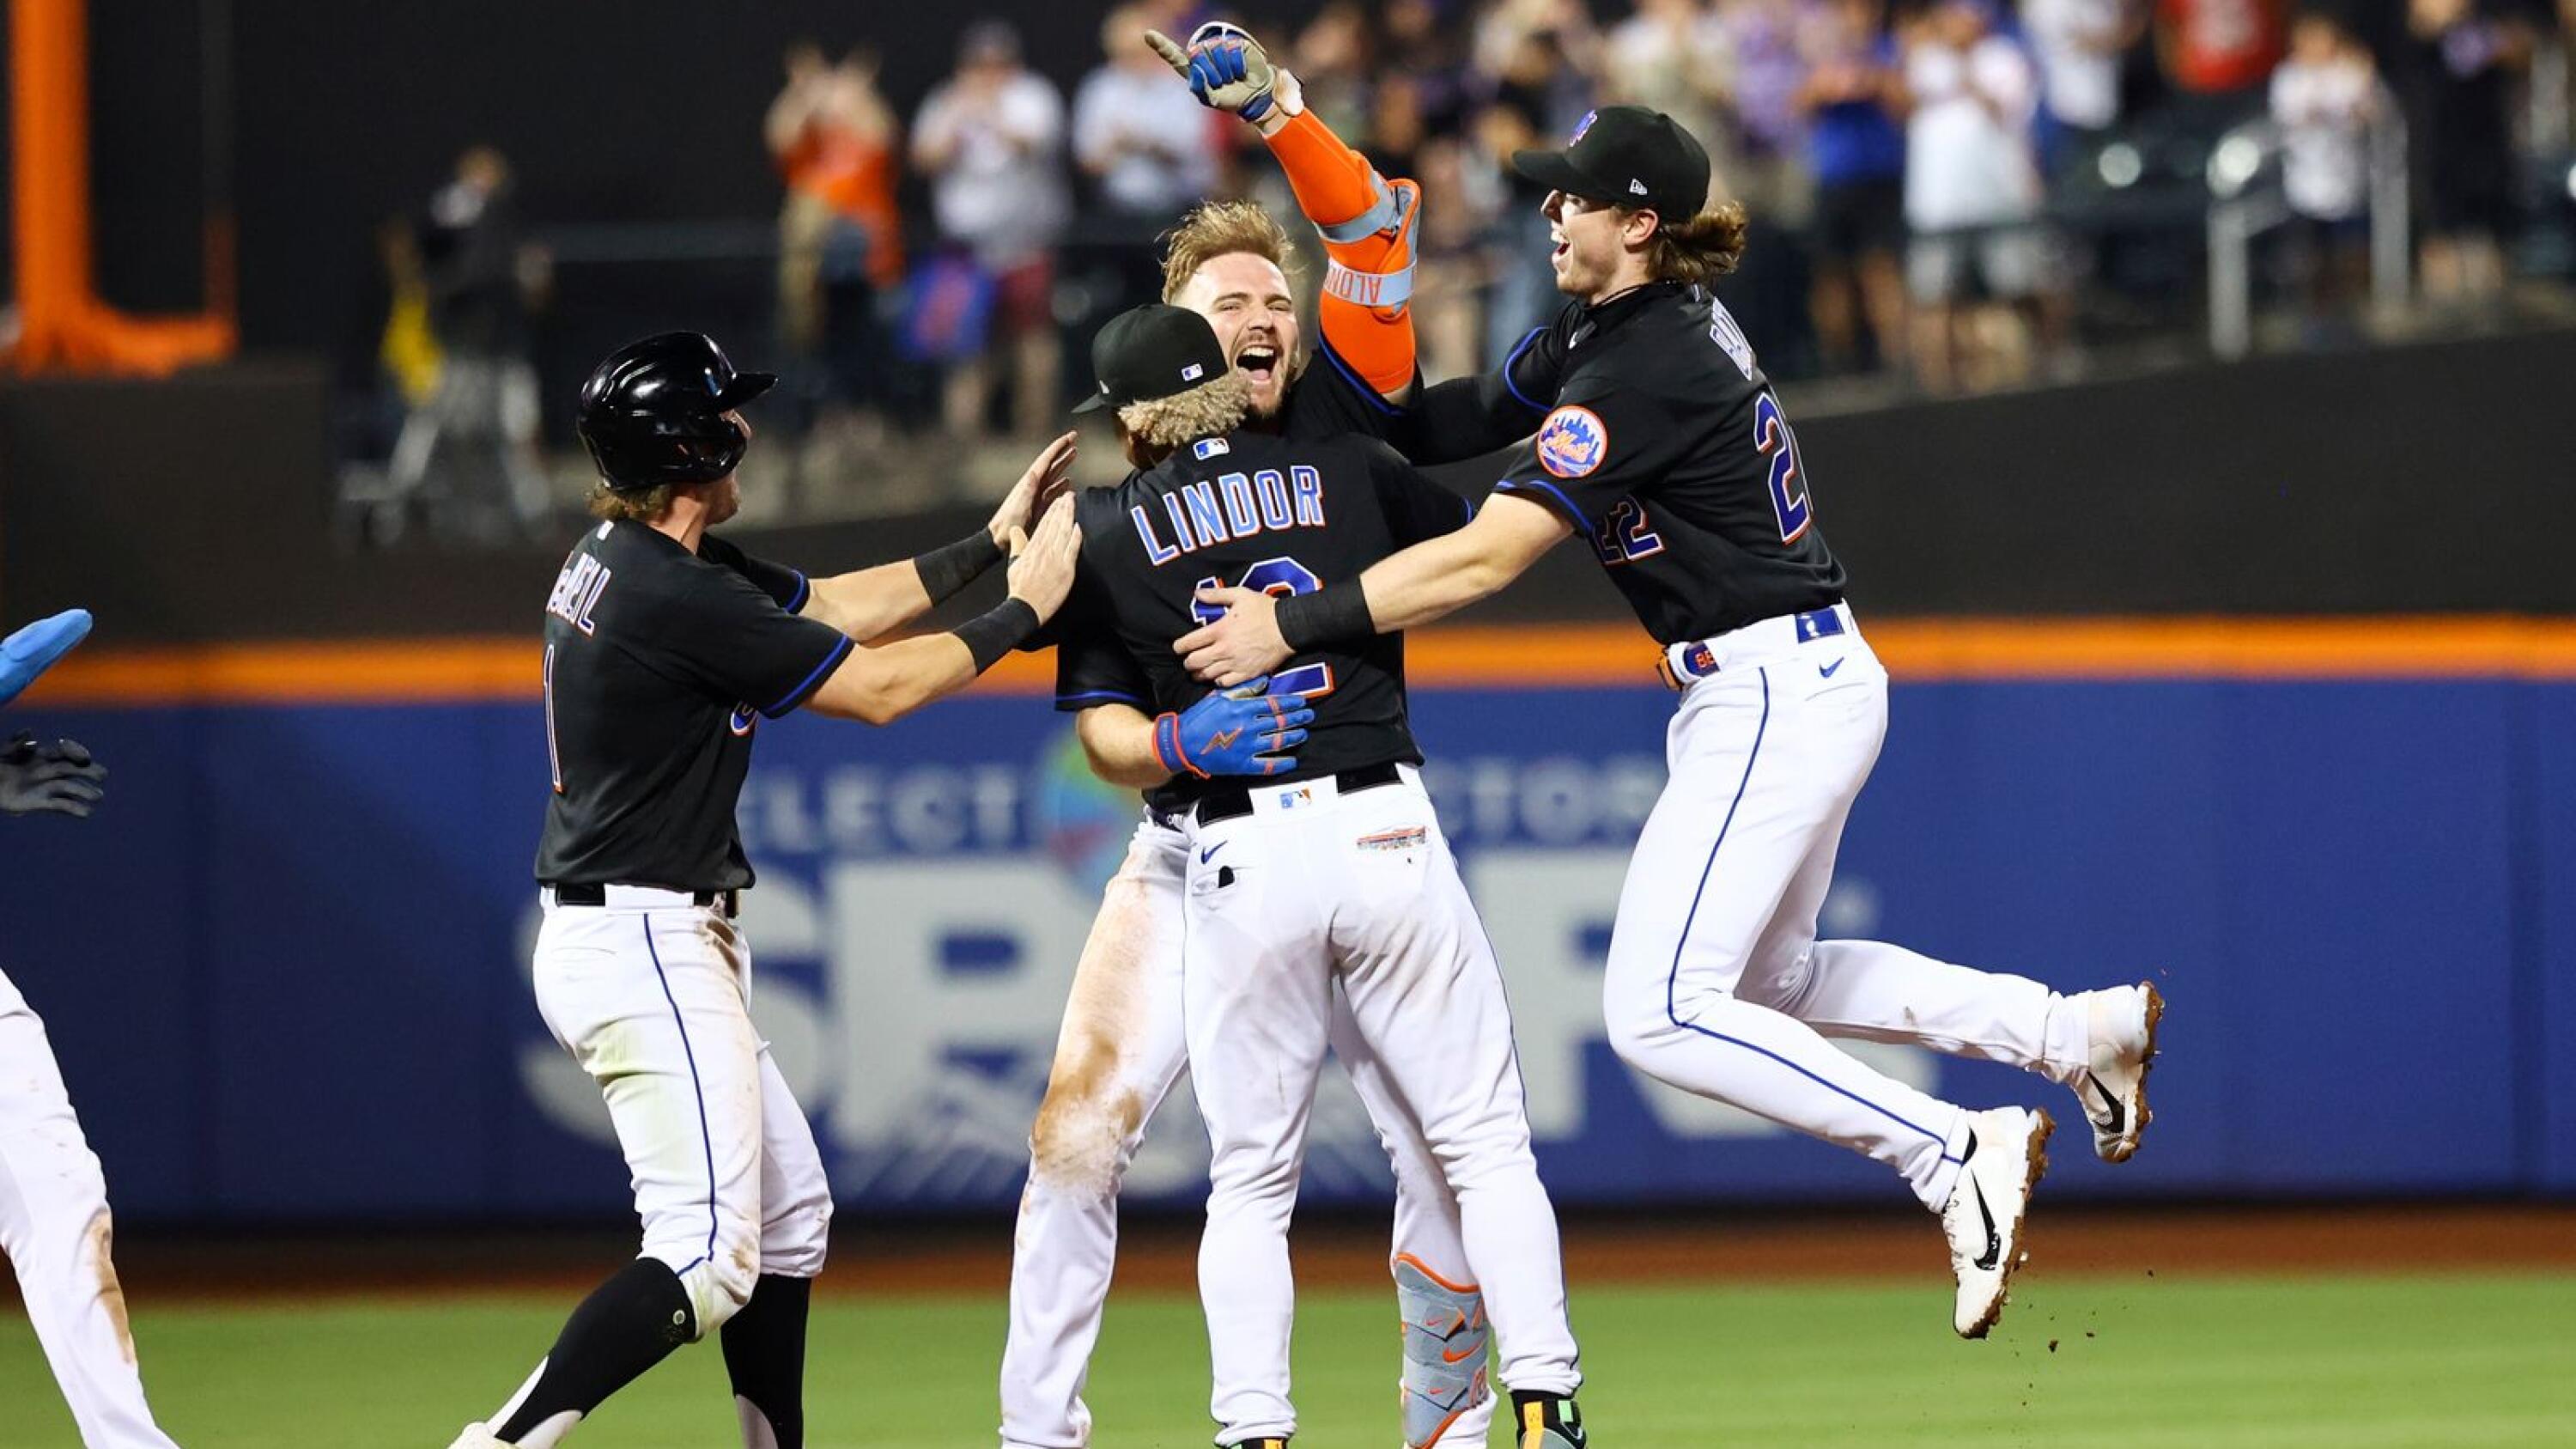 McNeil's tiebreaking homer in the 9th inning lifts the Mets to a 2-1 win  over the Marlins - The San Diego Union-Tribune